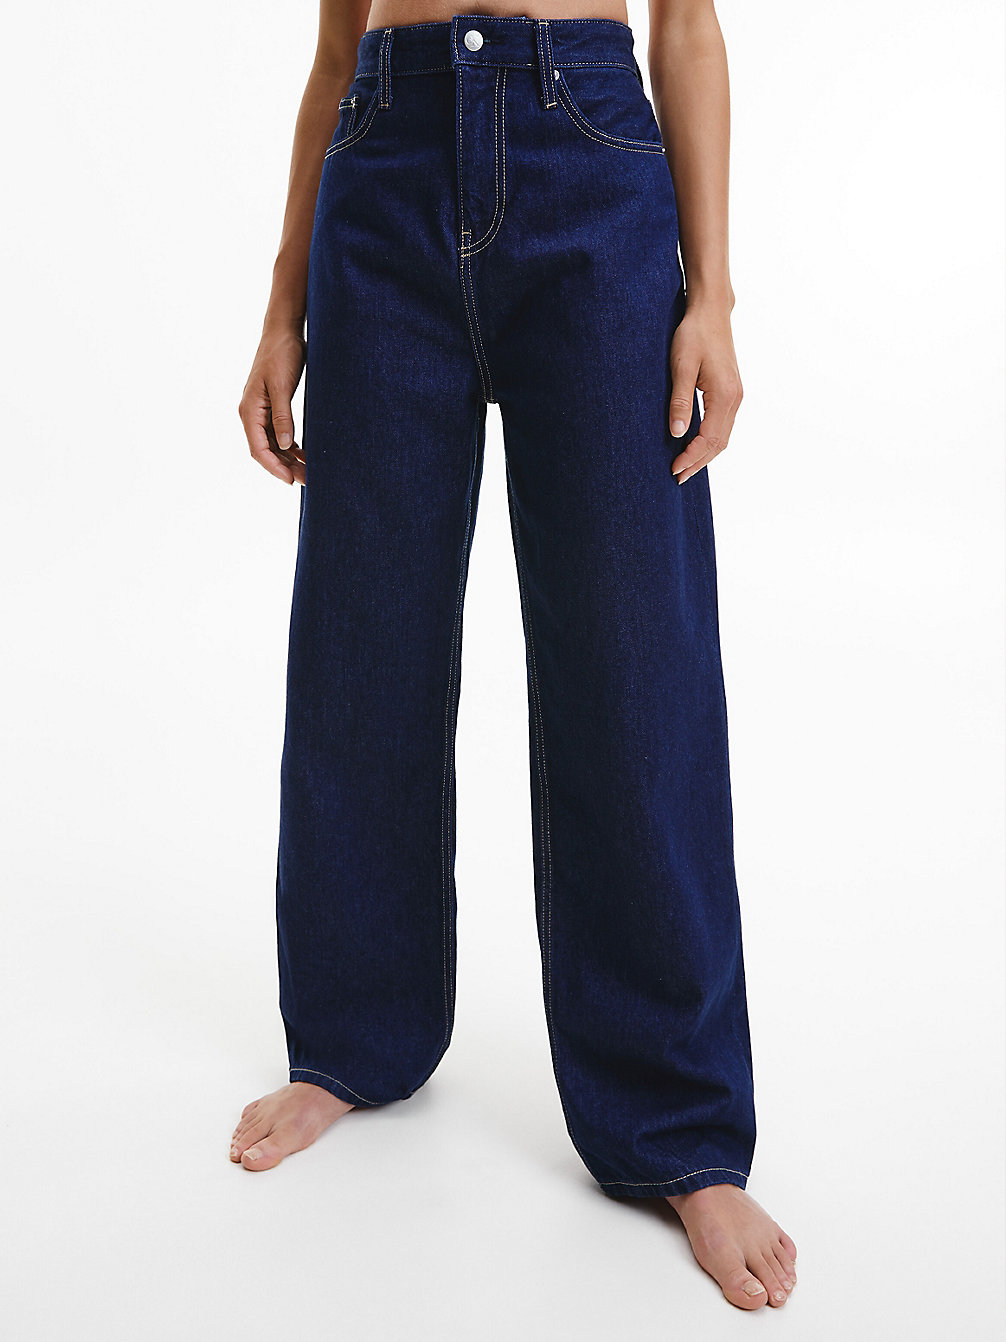 High Rise Relaxed Jeans > DENIM RINSE > undefined donna > Calvin Klein